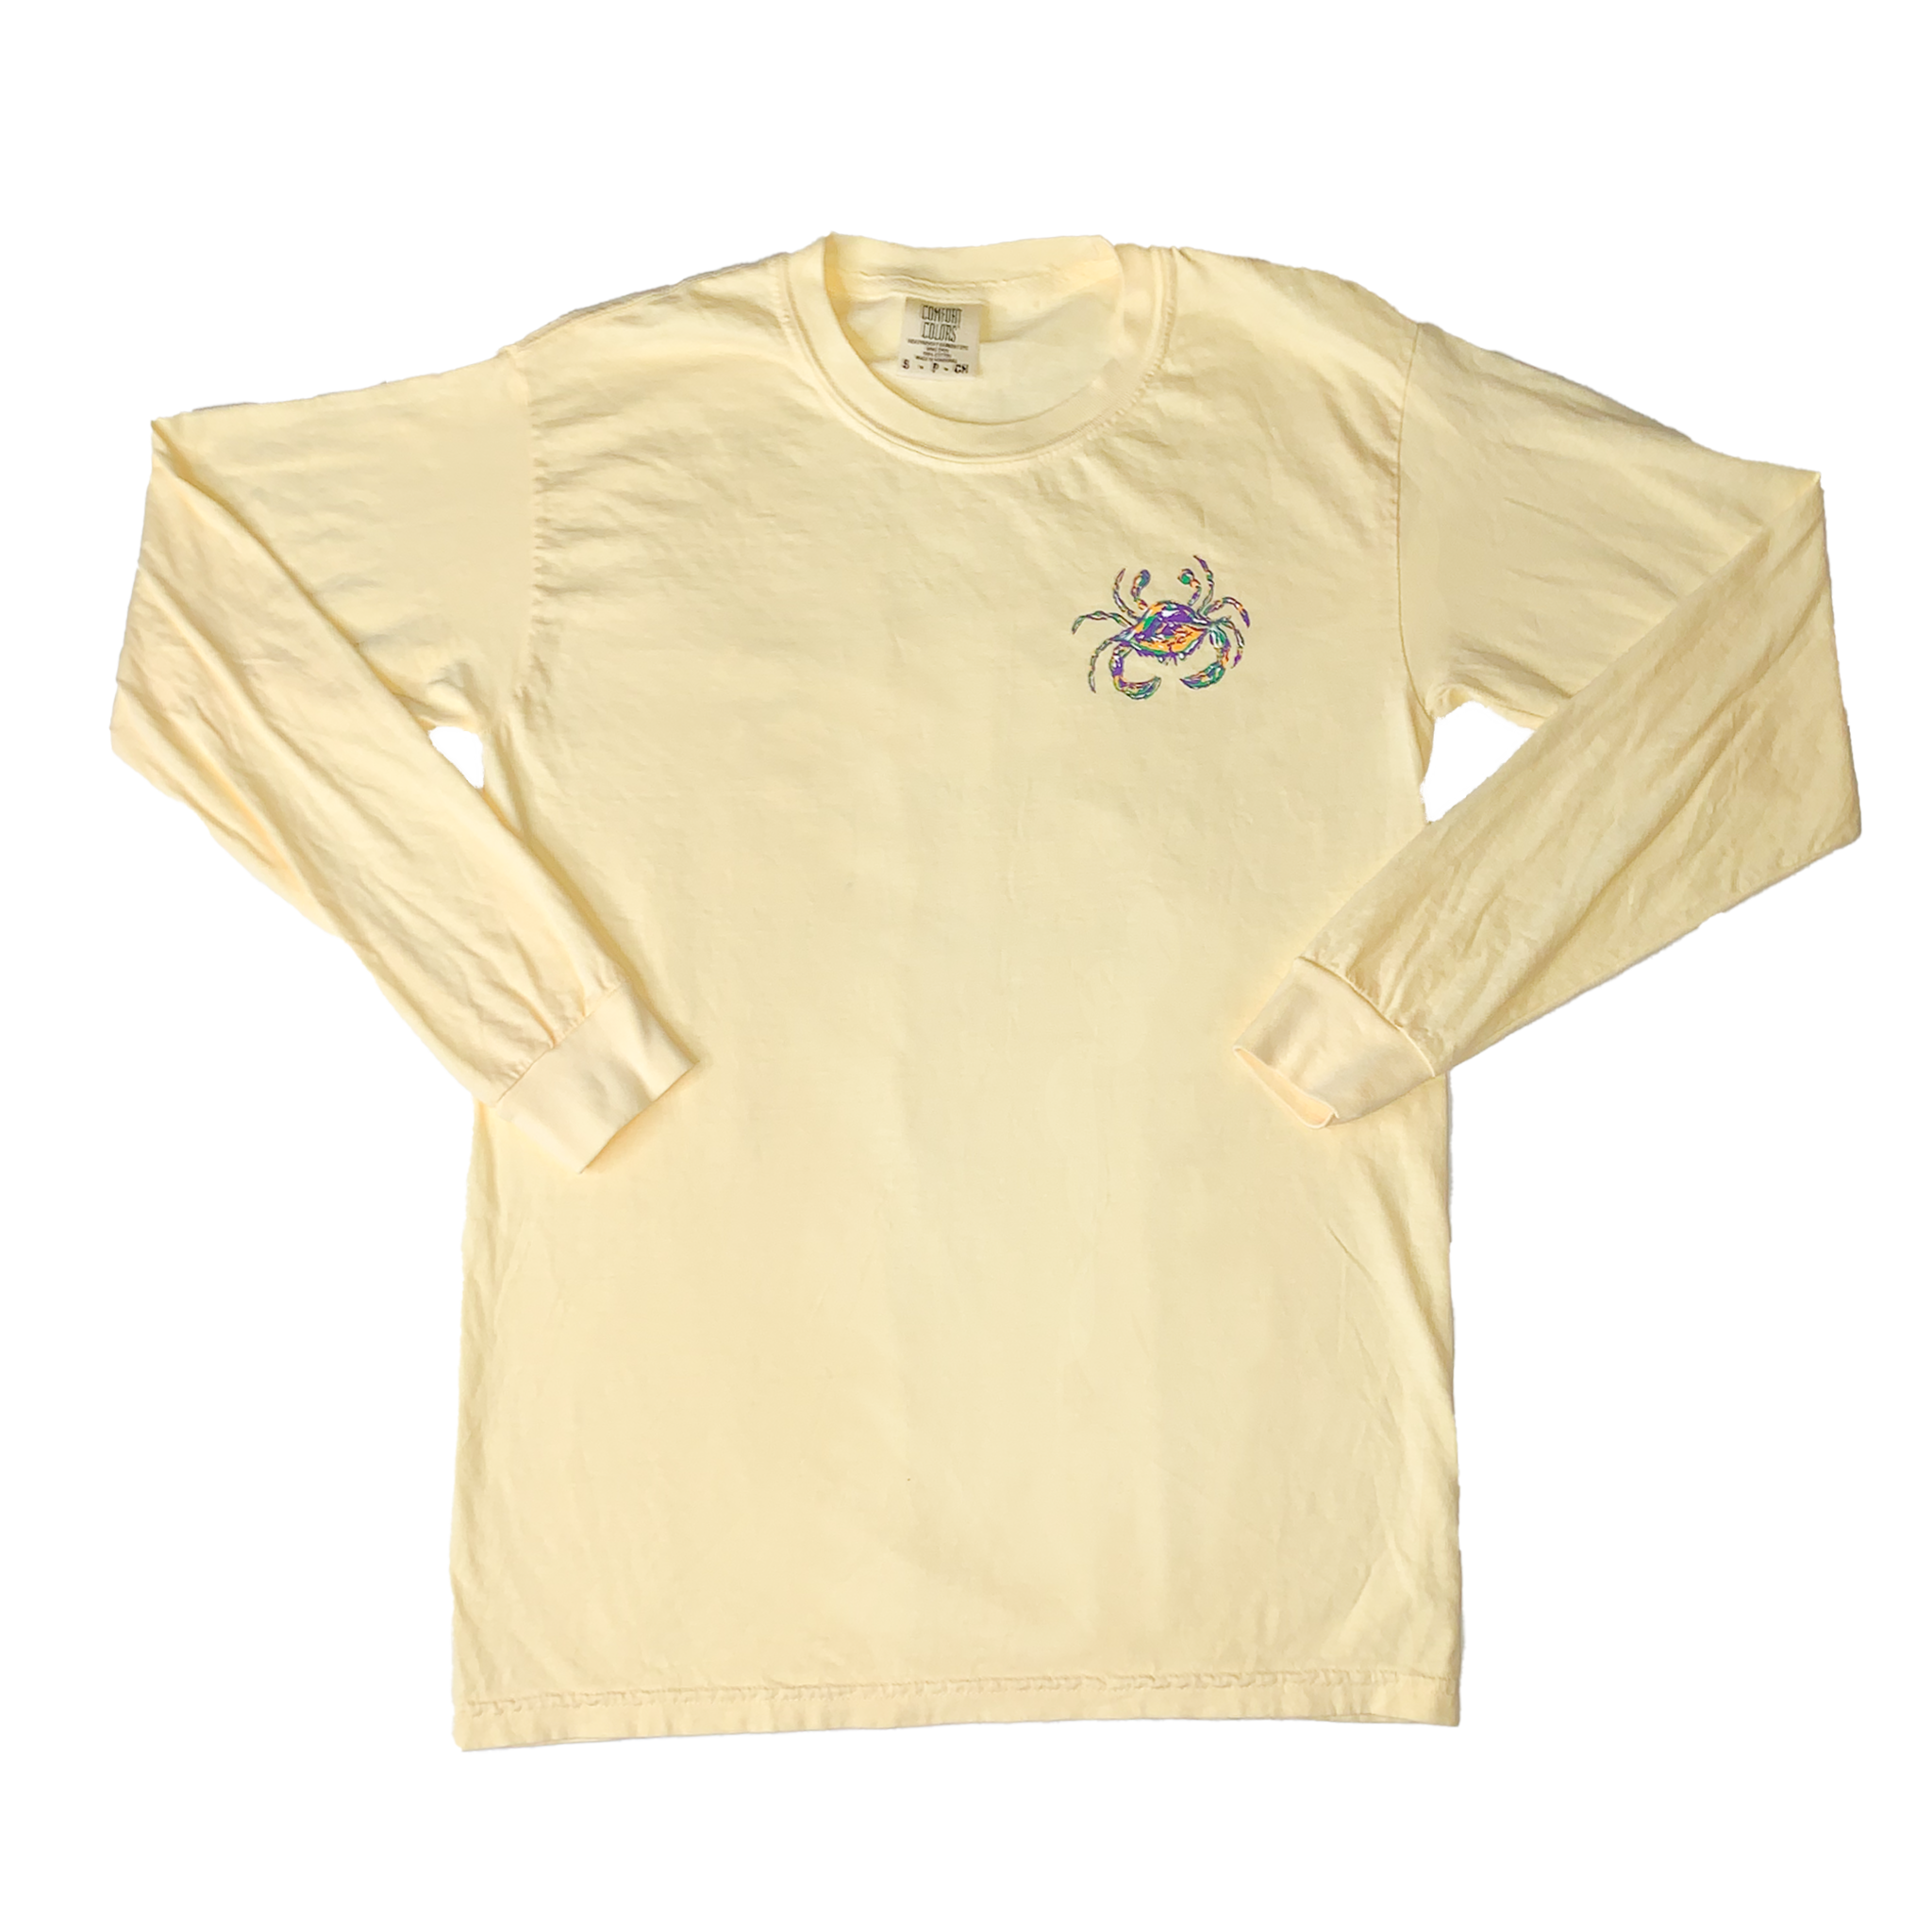 Soft yellow long sleeve shirt with a Mardi Gras Crab on the left chest.